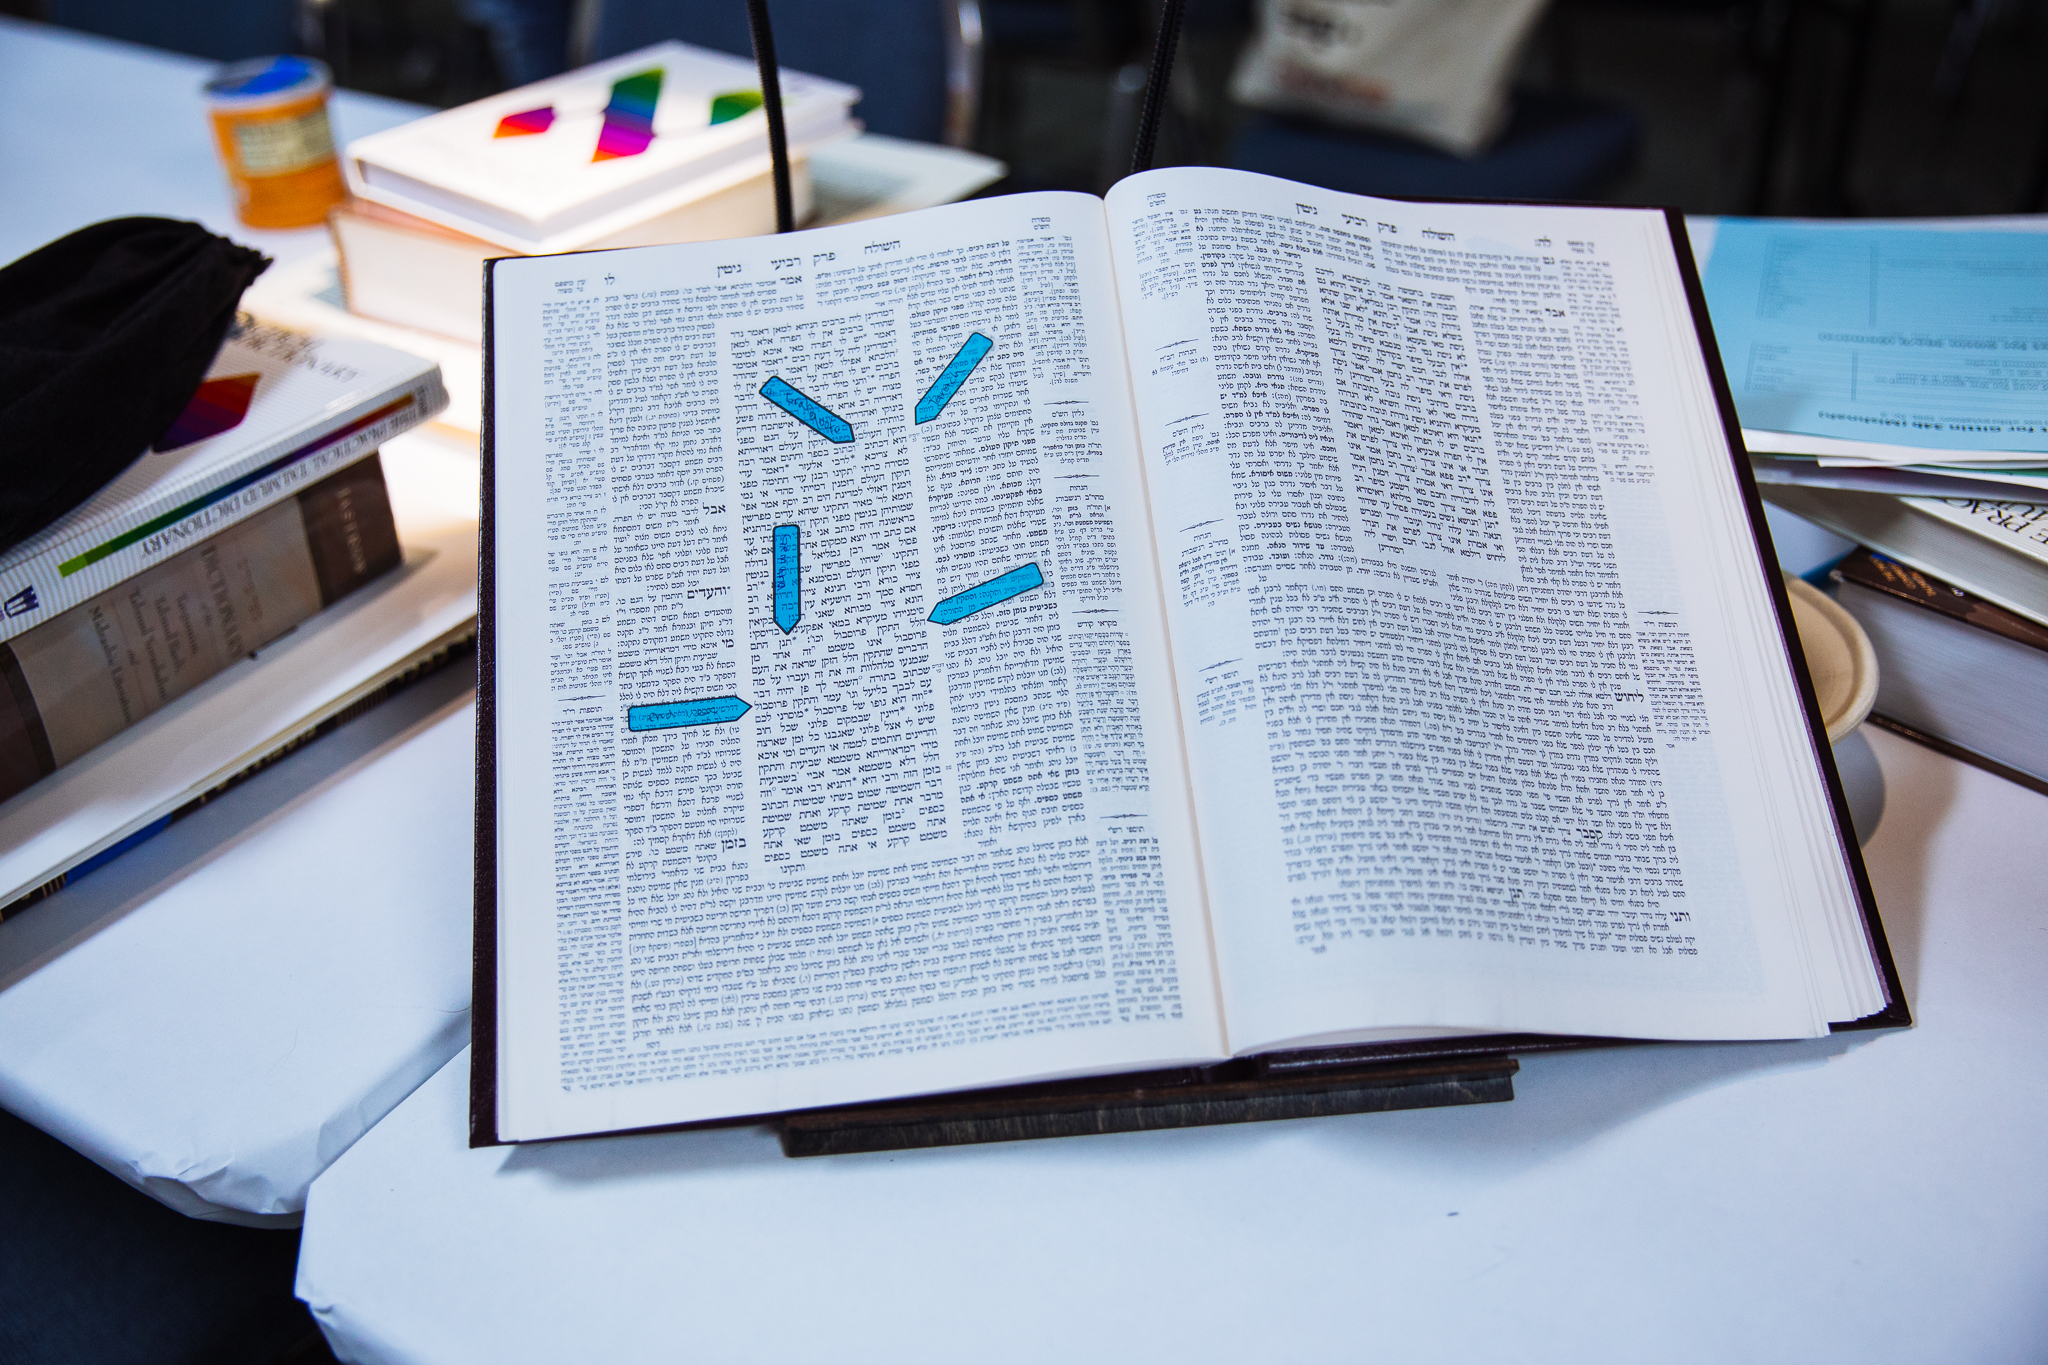 A Talmud sits on a table, propped up by a bookstand, open to a page. There are small, blue stickies marking the place on one of the pages.